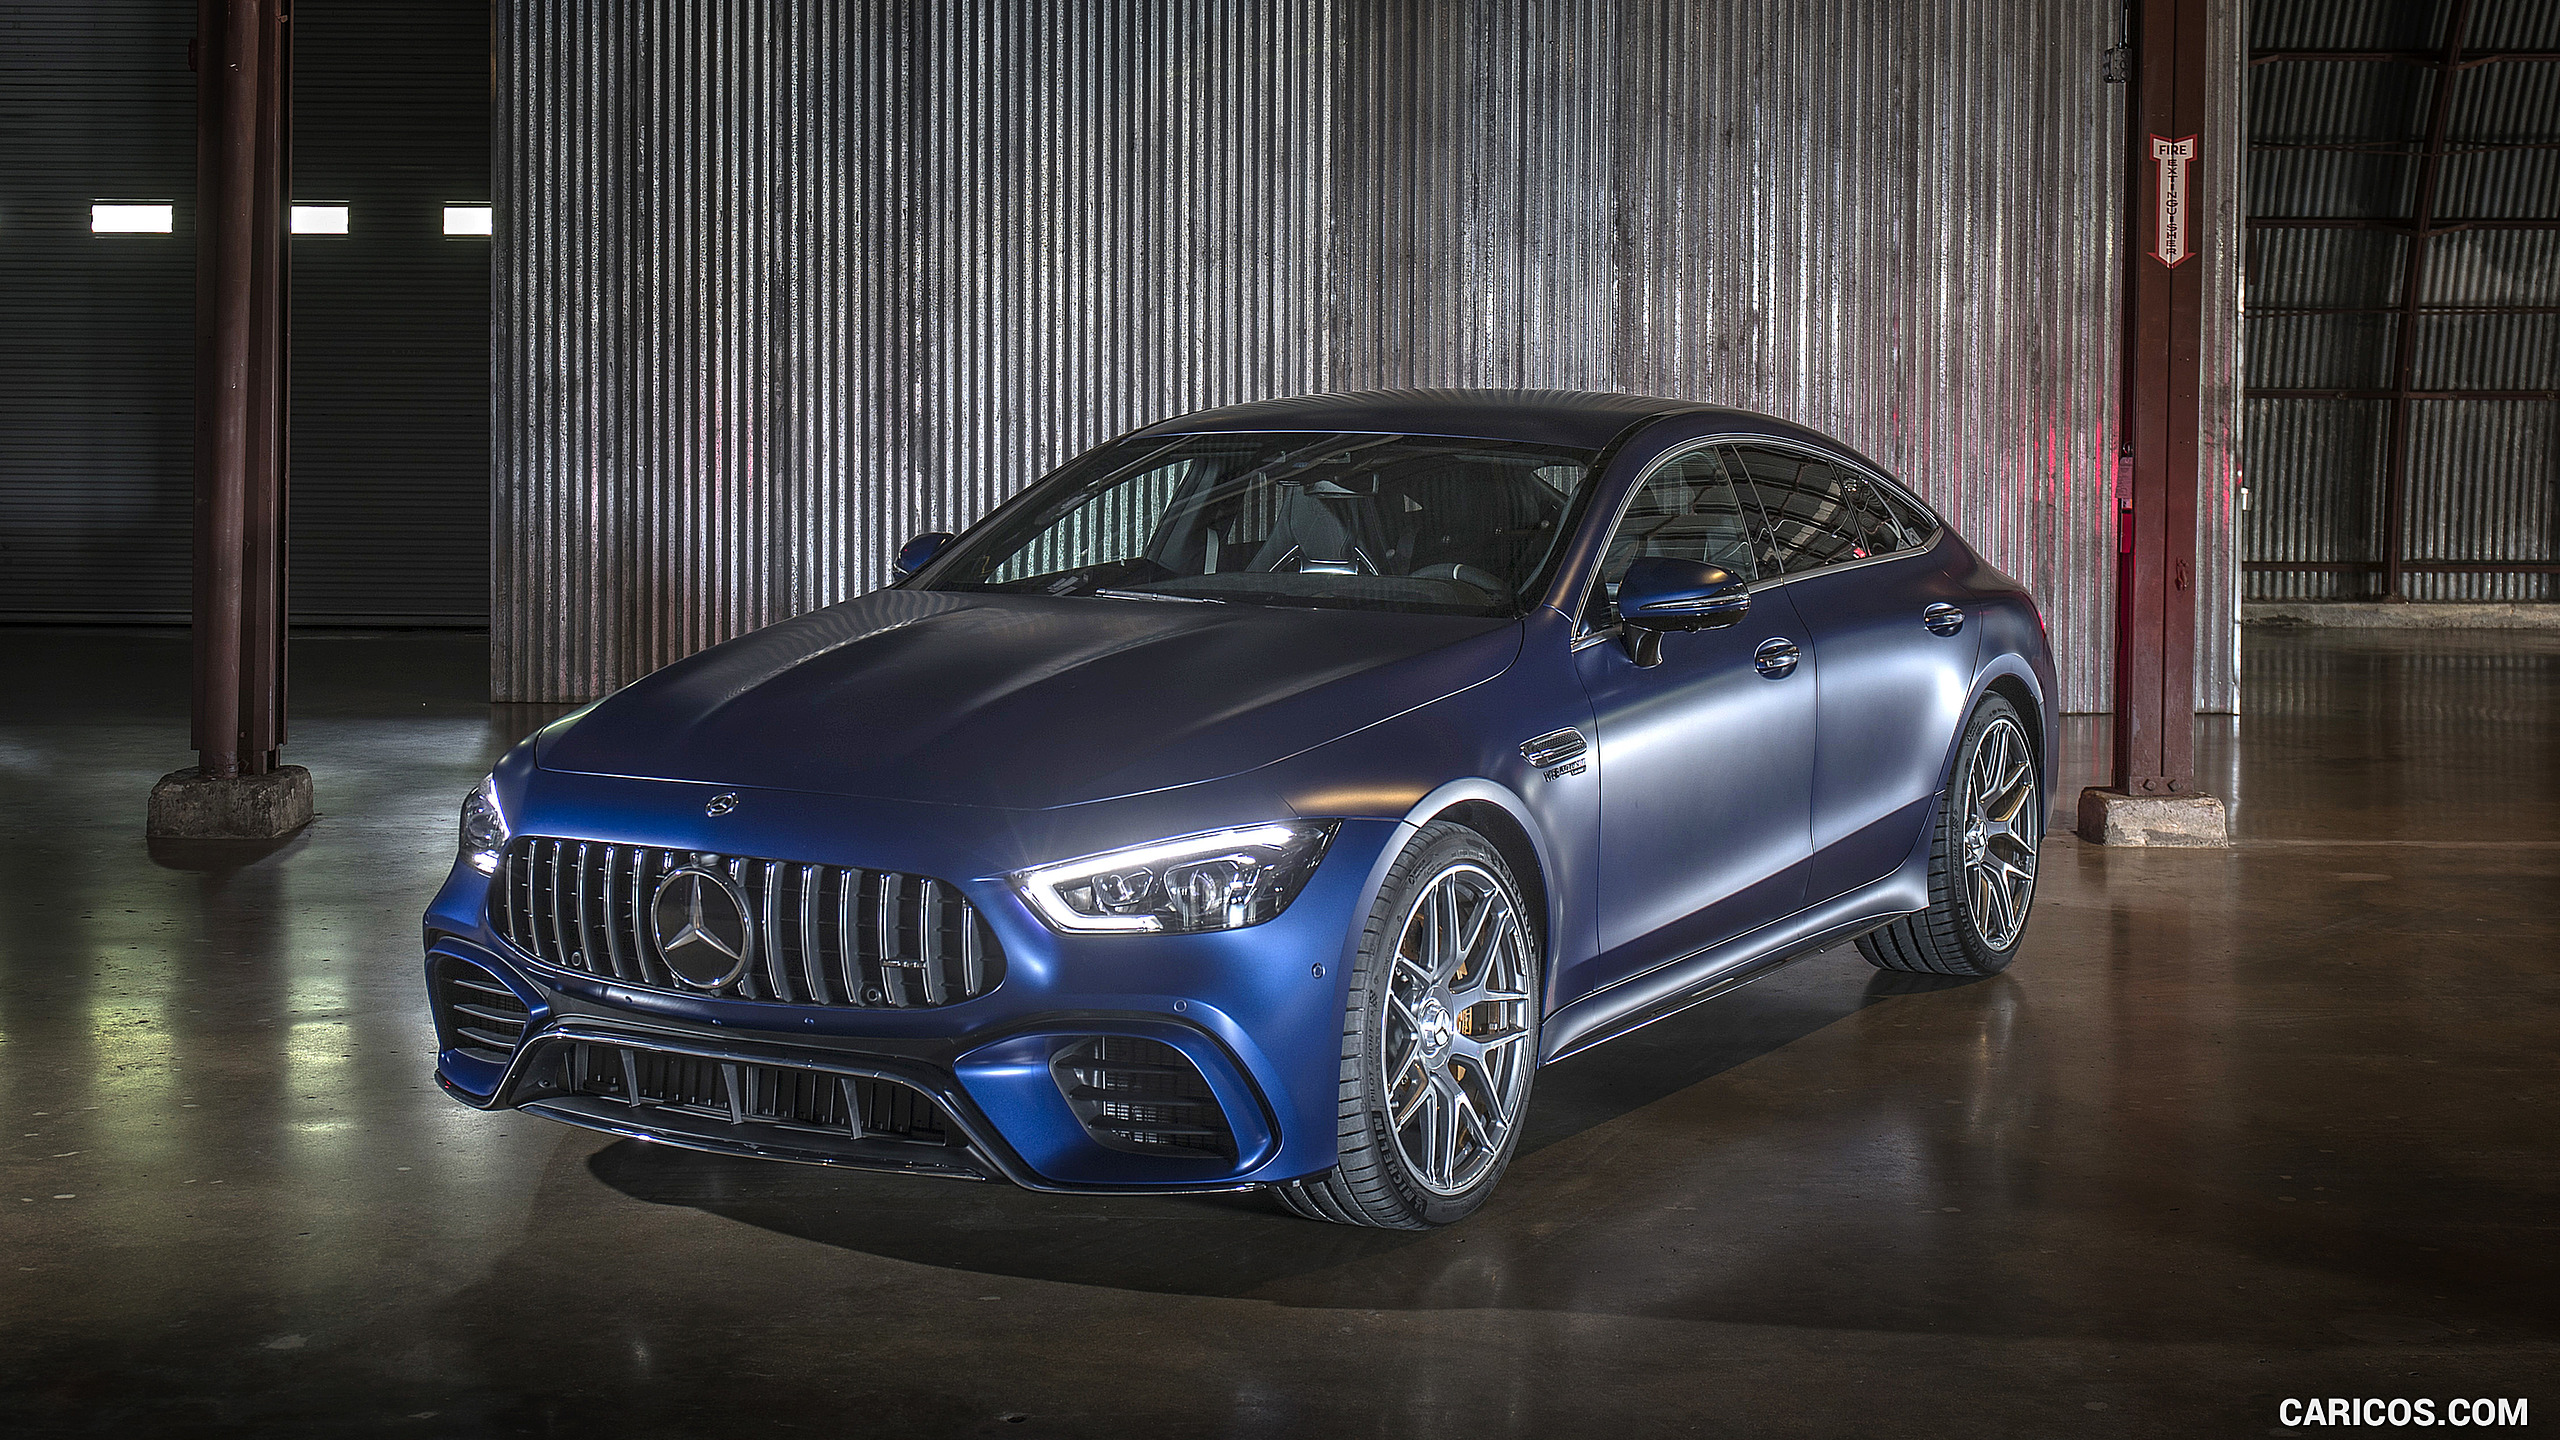 2019 Mercedes-AMG GT 63 S 4MATIC+ 4-Door Coupe - Front Three-Quarter, #135 of 427